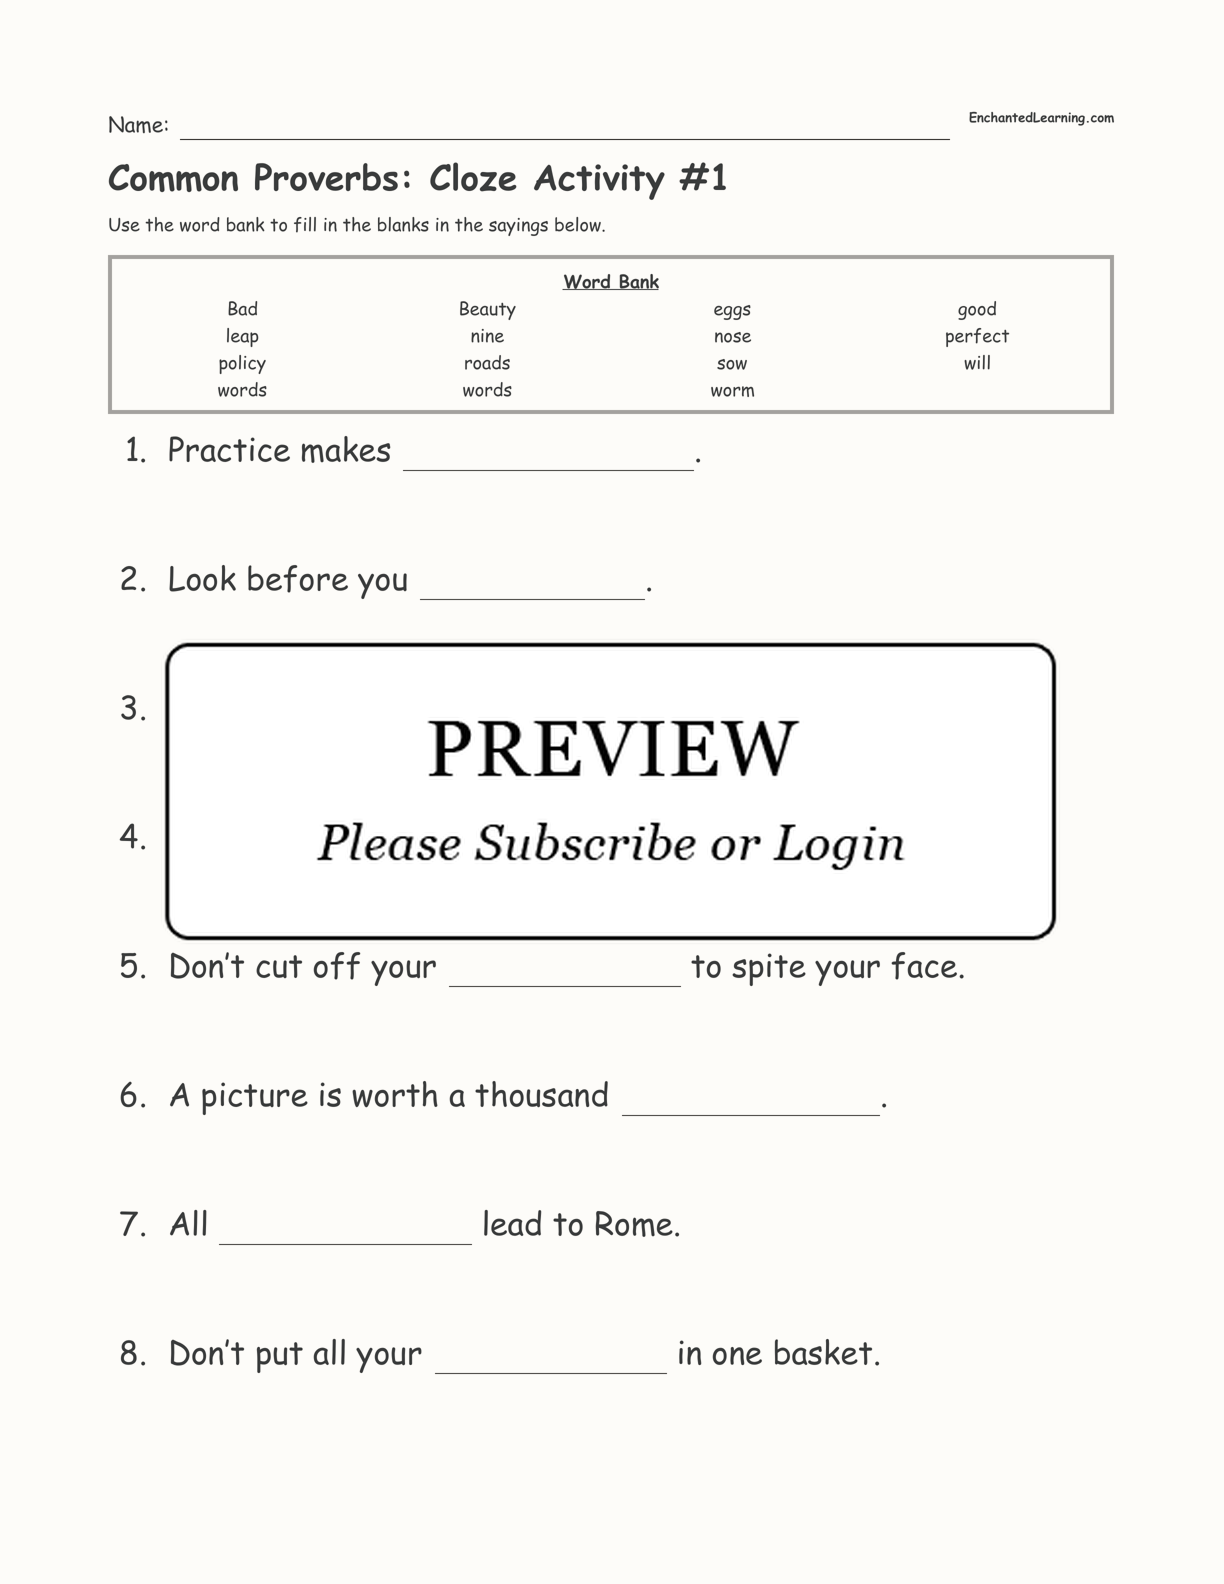 Common Proverbs: Cloze Activity #1 interactive worksheet page 1